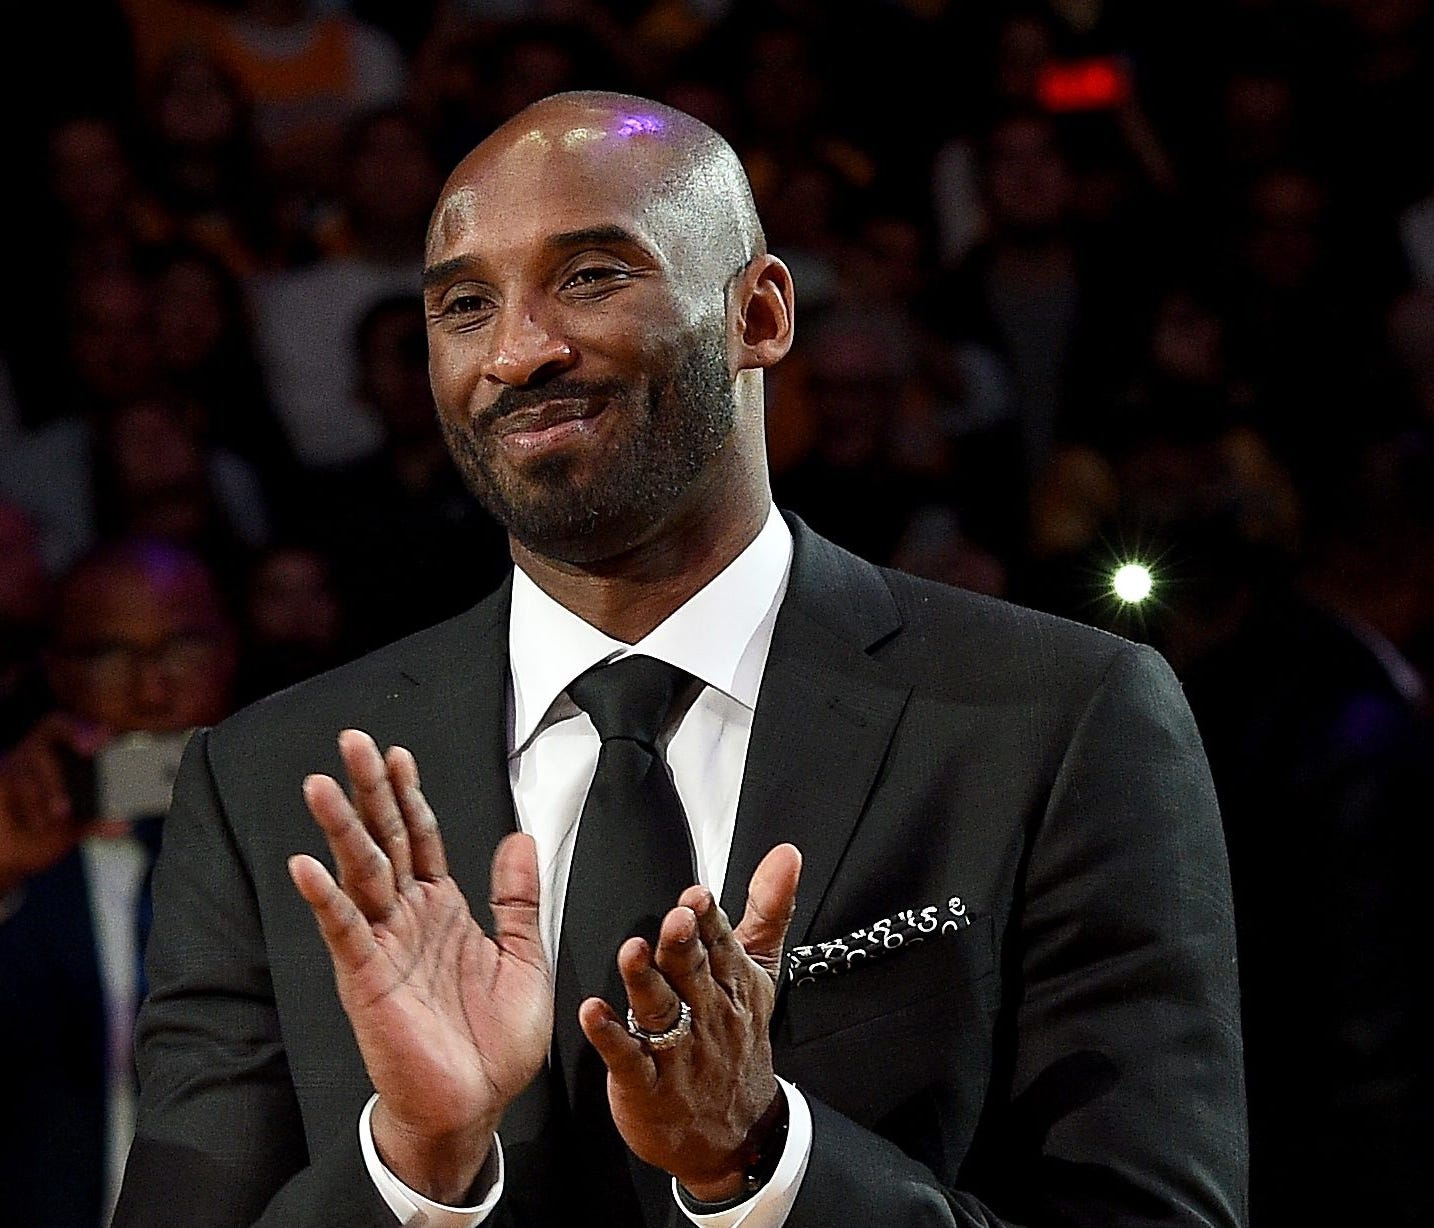 LOS ANGELES, CA - DECEMBER 18:  Kobe Bryant smiles at halftime as both his #8 and #24 Los Angeles Lakers jerseys are retired at Staples Center on December 18, 2017 in Los Angeles, California. NOTE TO USER: User expressly acknowledges and agrees that,